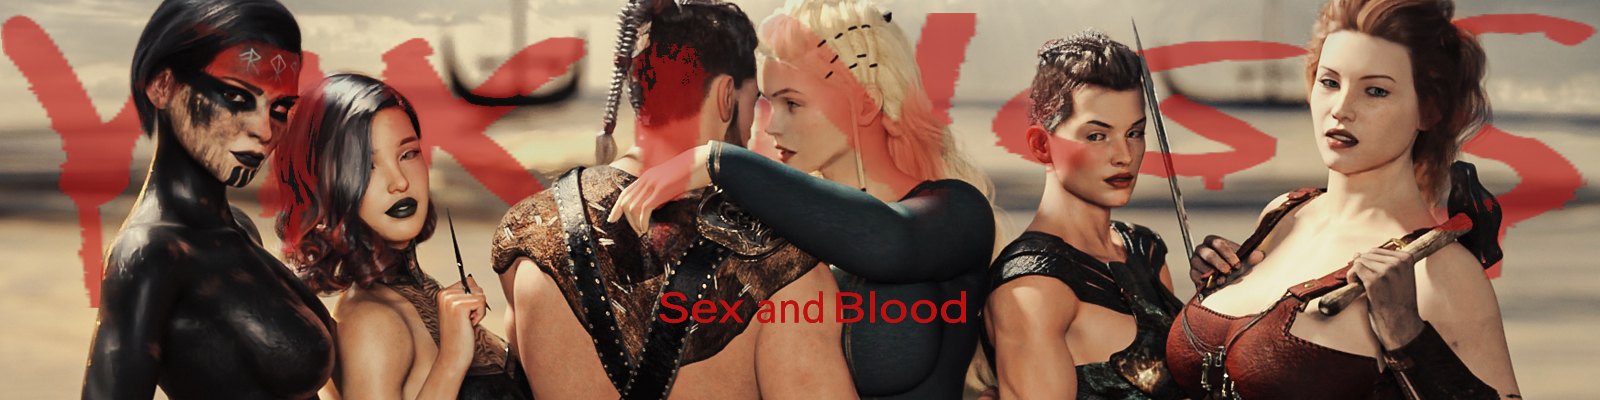 Vikings Sex and Blood [PashiGames] Adult xxx Game Download